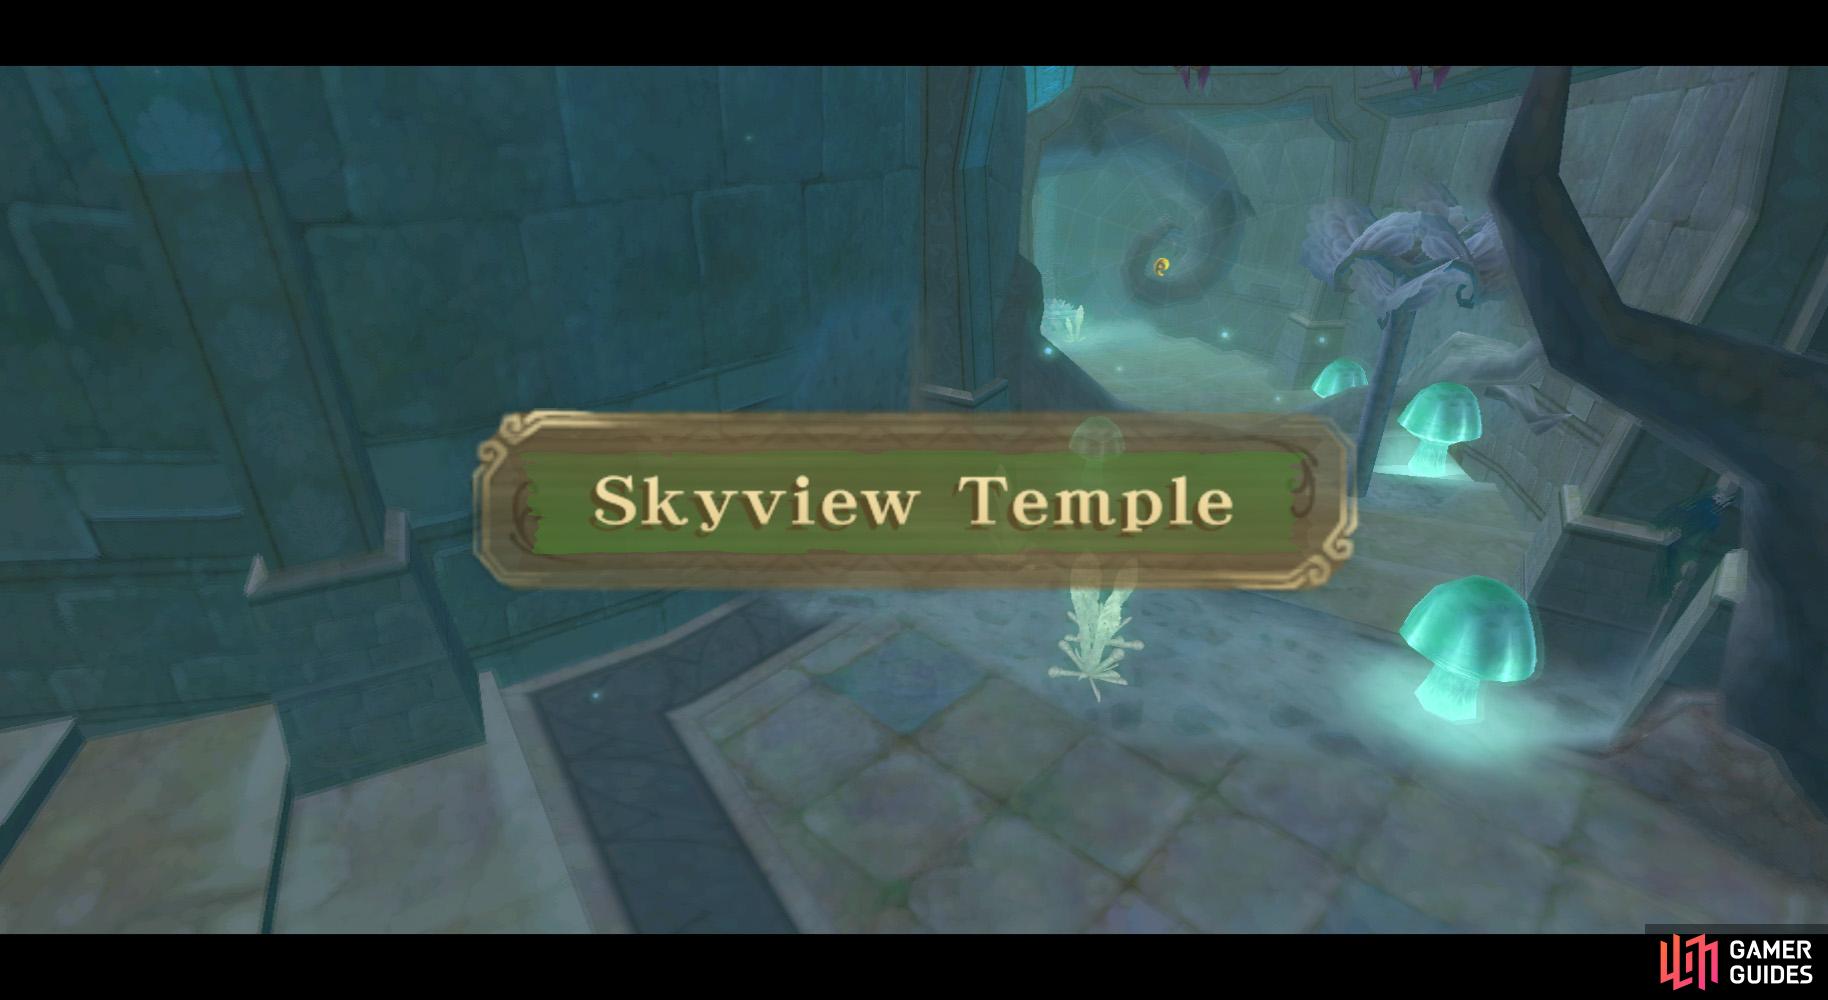 Skyview Temple is, unsurprisingly, forest-themed..